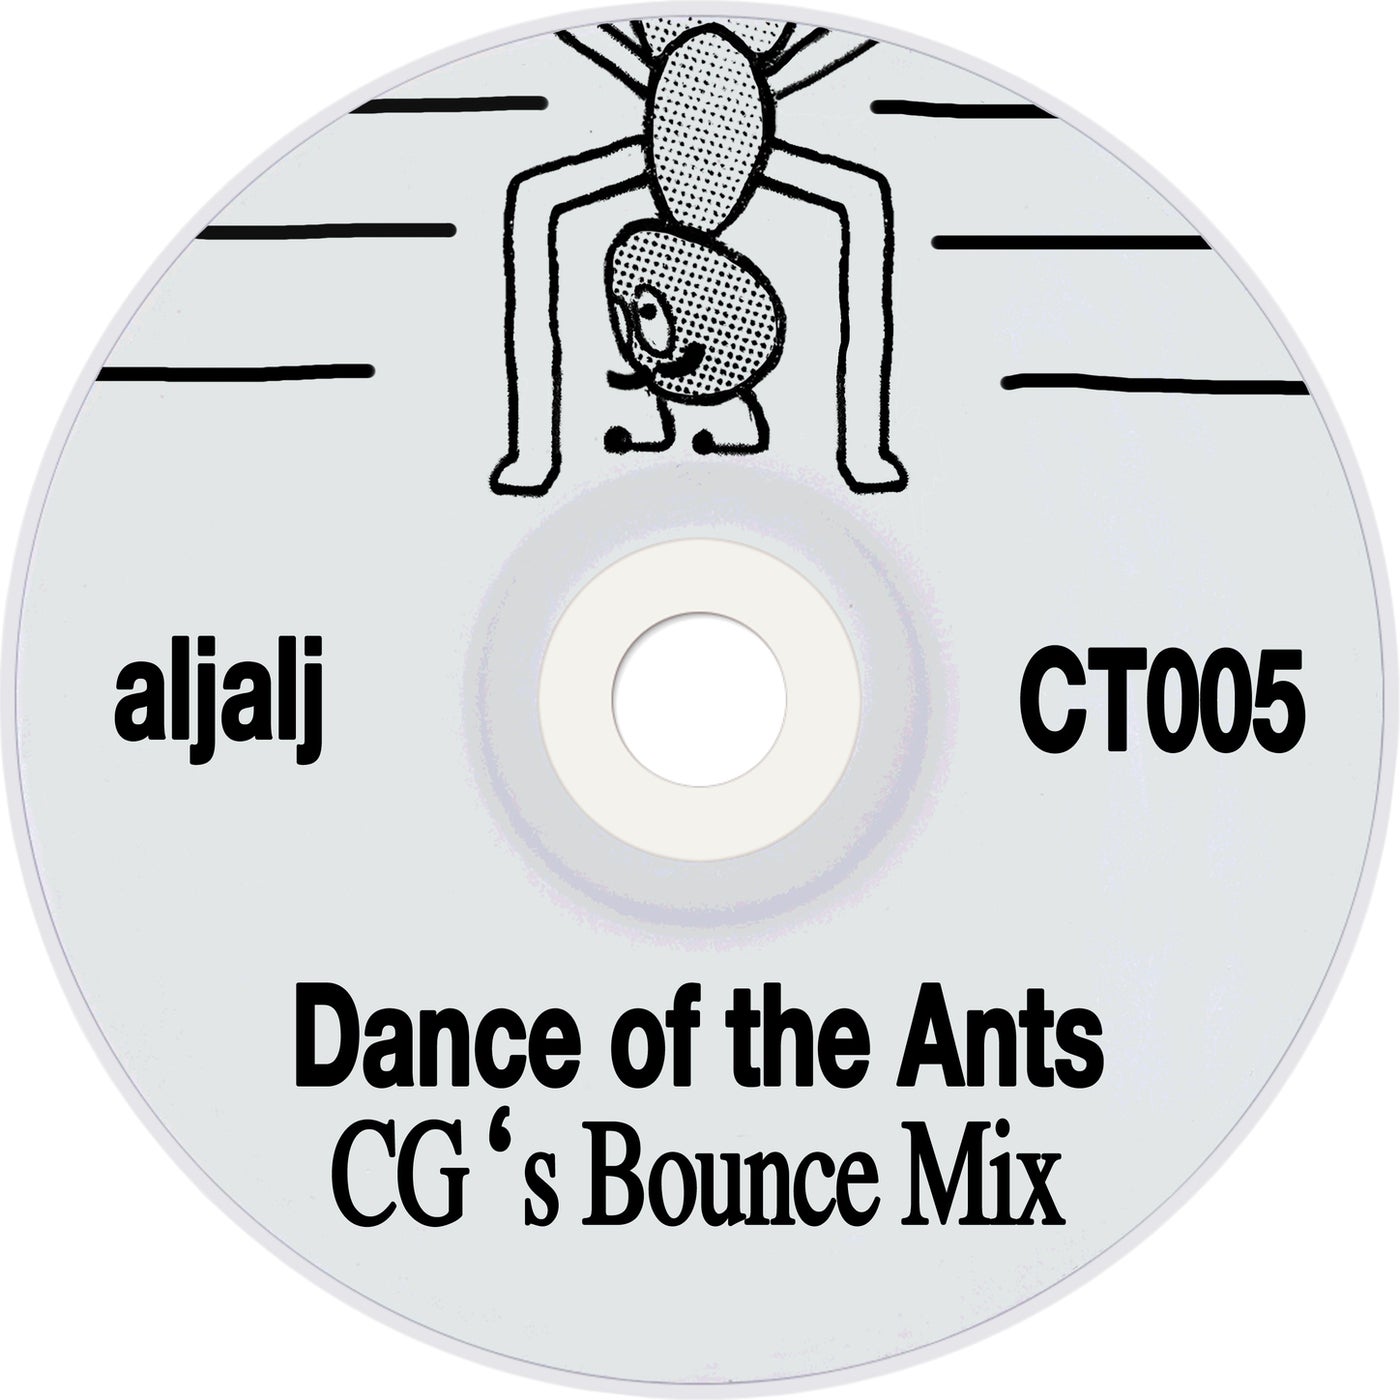 Dance of the Ants (Chris Gerber's Bounce Mix)